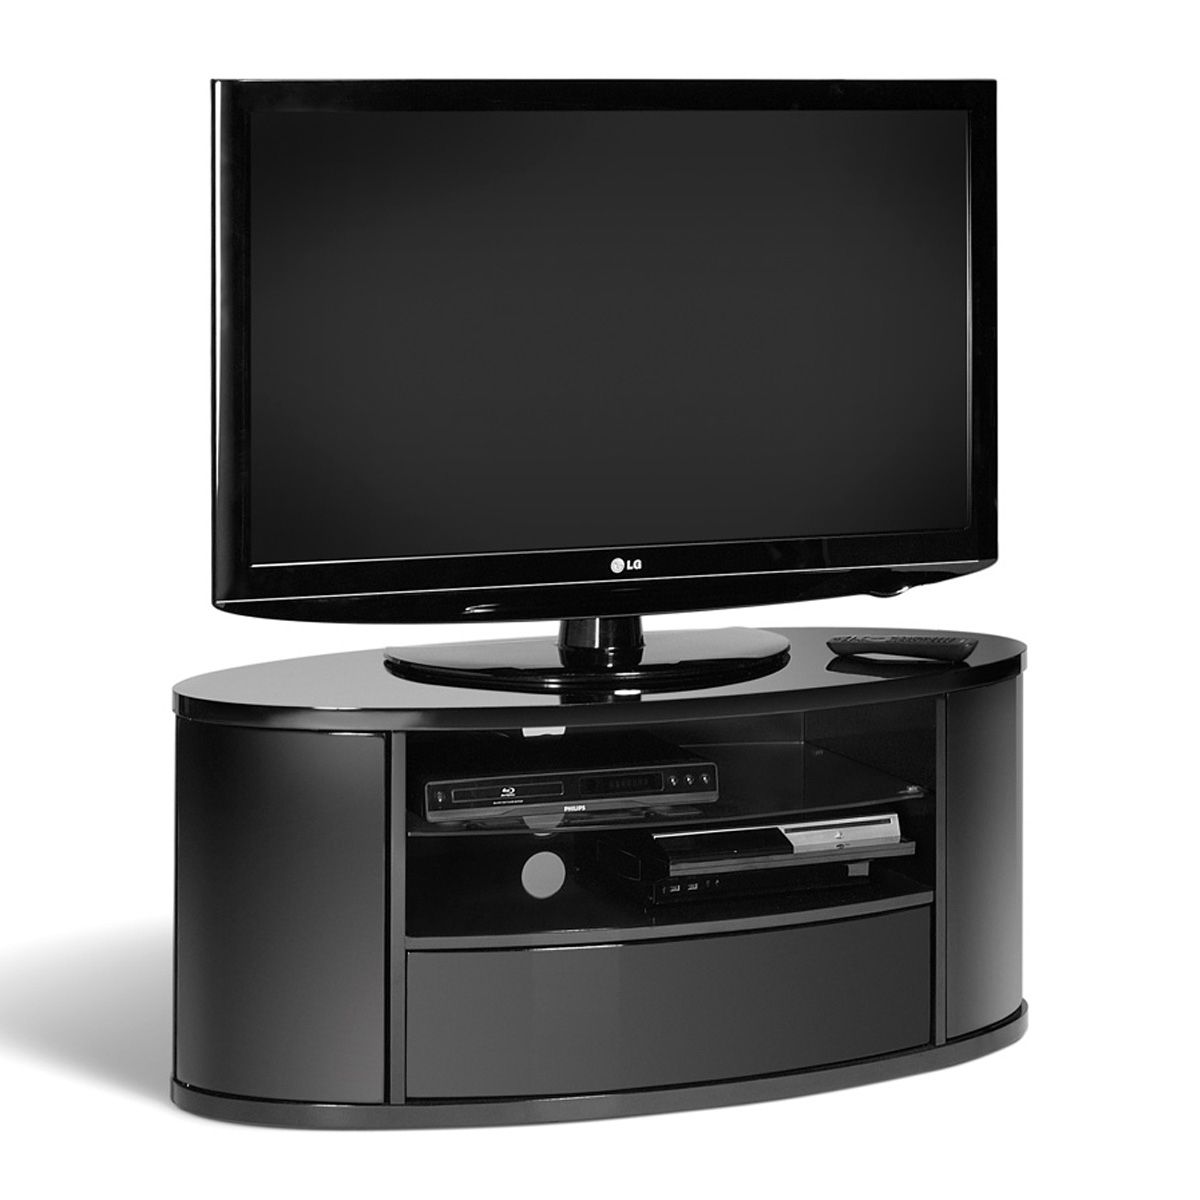 Curved Design Black Lcd Plasma Tv Stand 40 50 Inch Screen Inside Tv Stands For Plasma Tv (Photo 1 of 15)